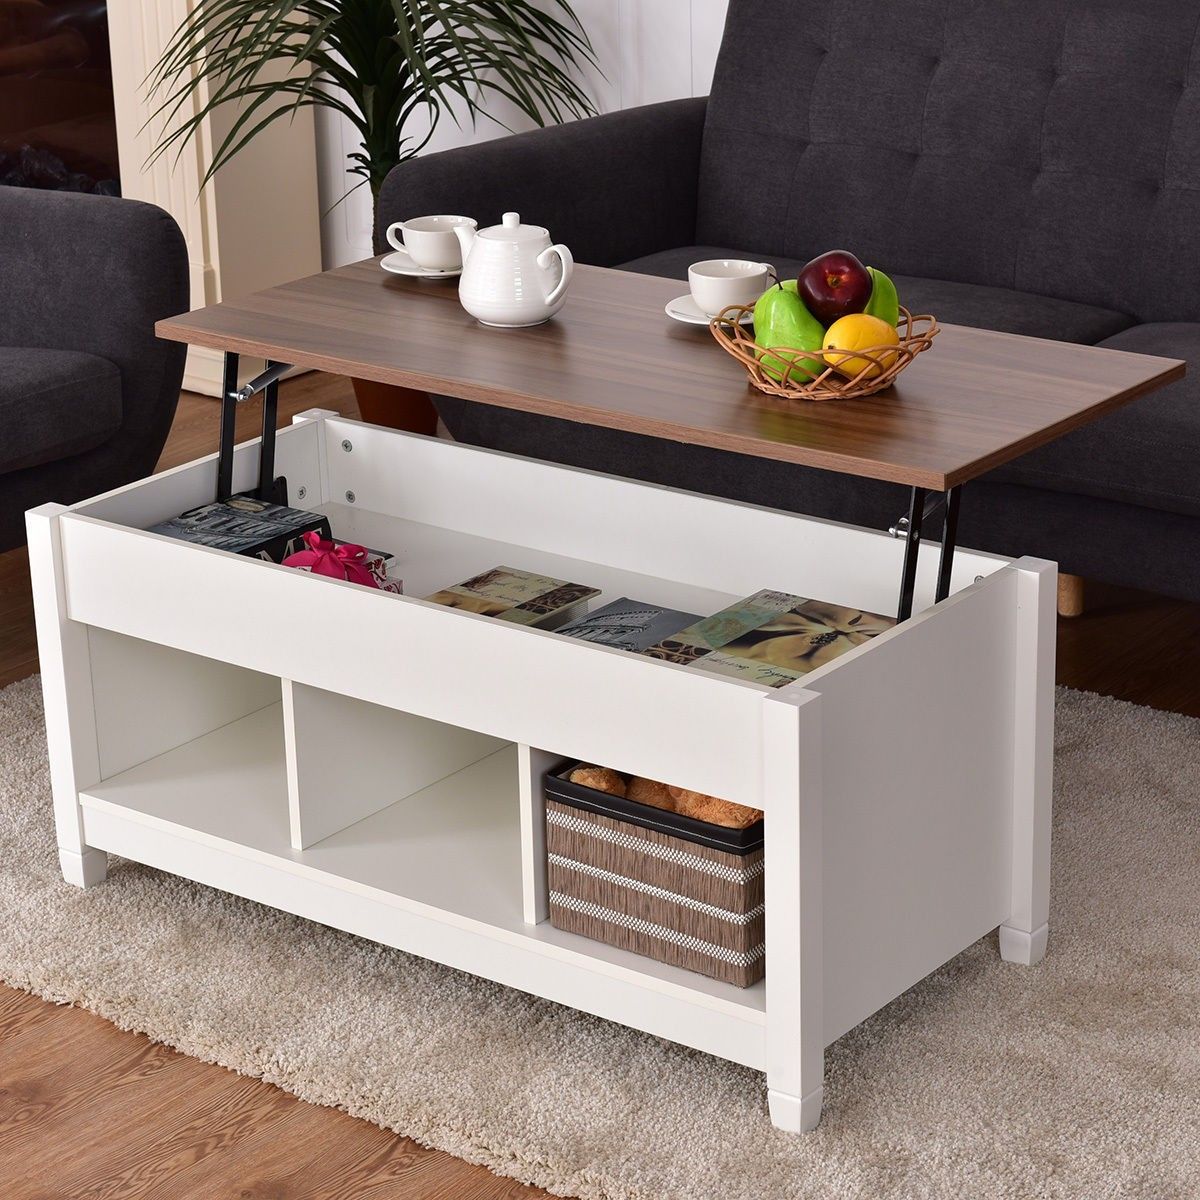 Lift Top Coffee Table With Hidden Storage Compartment Home Living Room Inside Modern Coffee Tables With Hidden Storage Compartments (View 19 of 20)